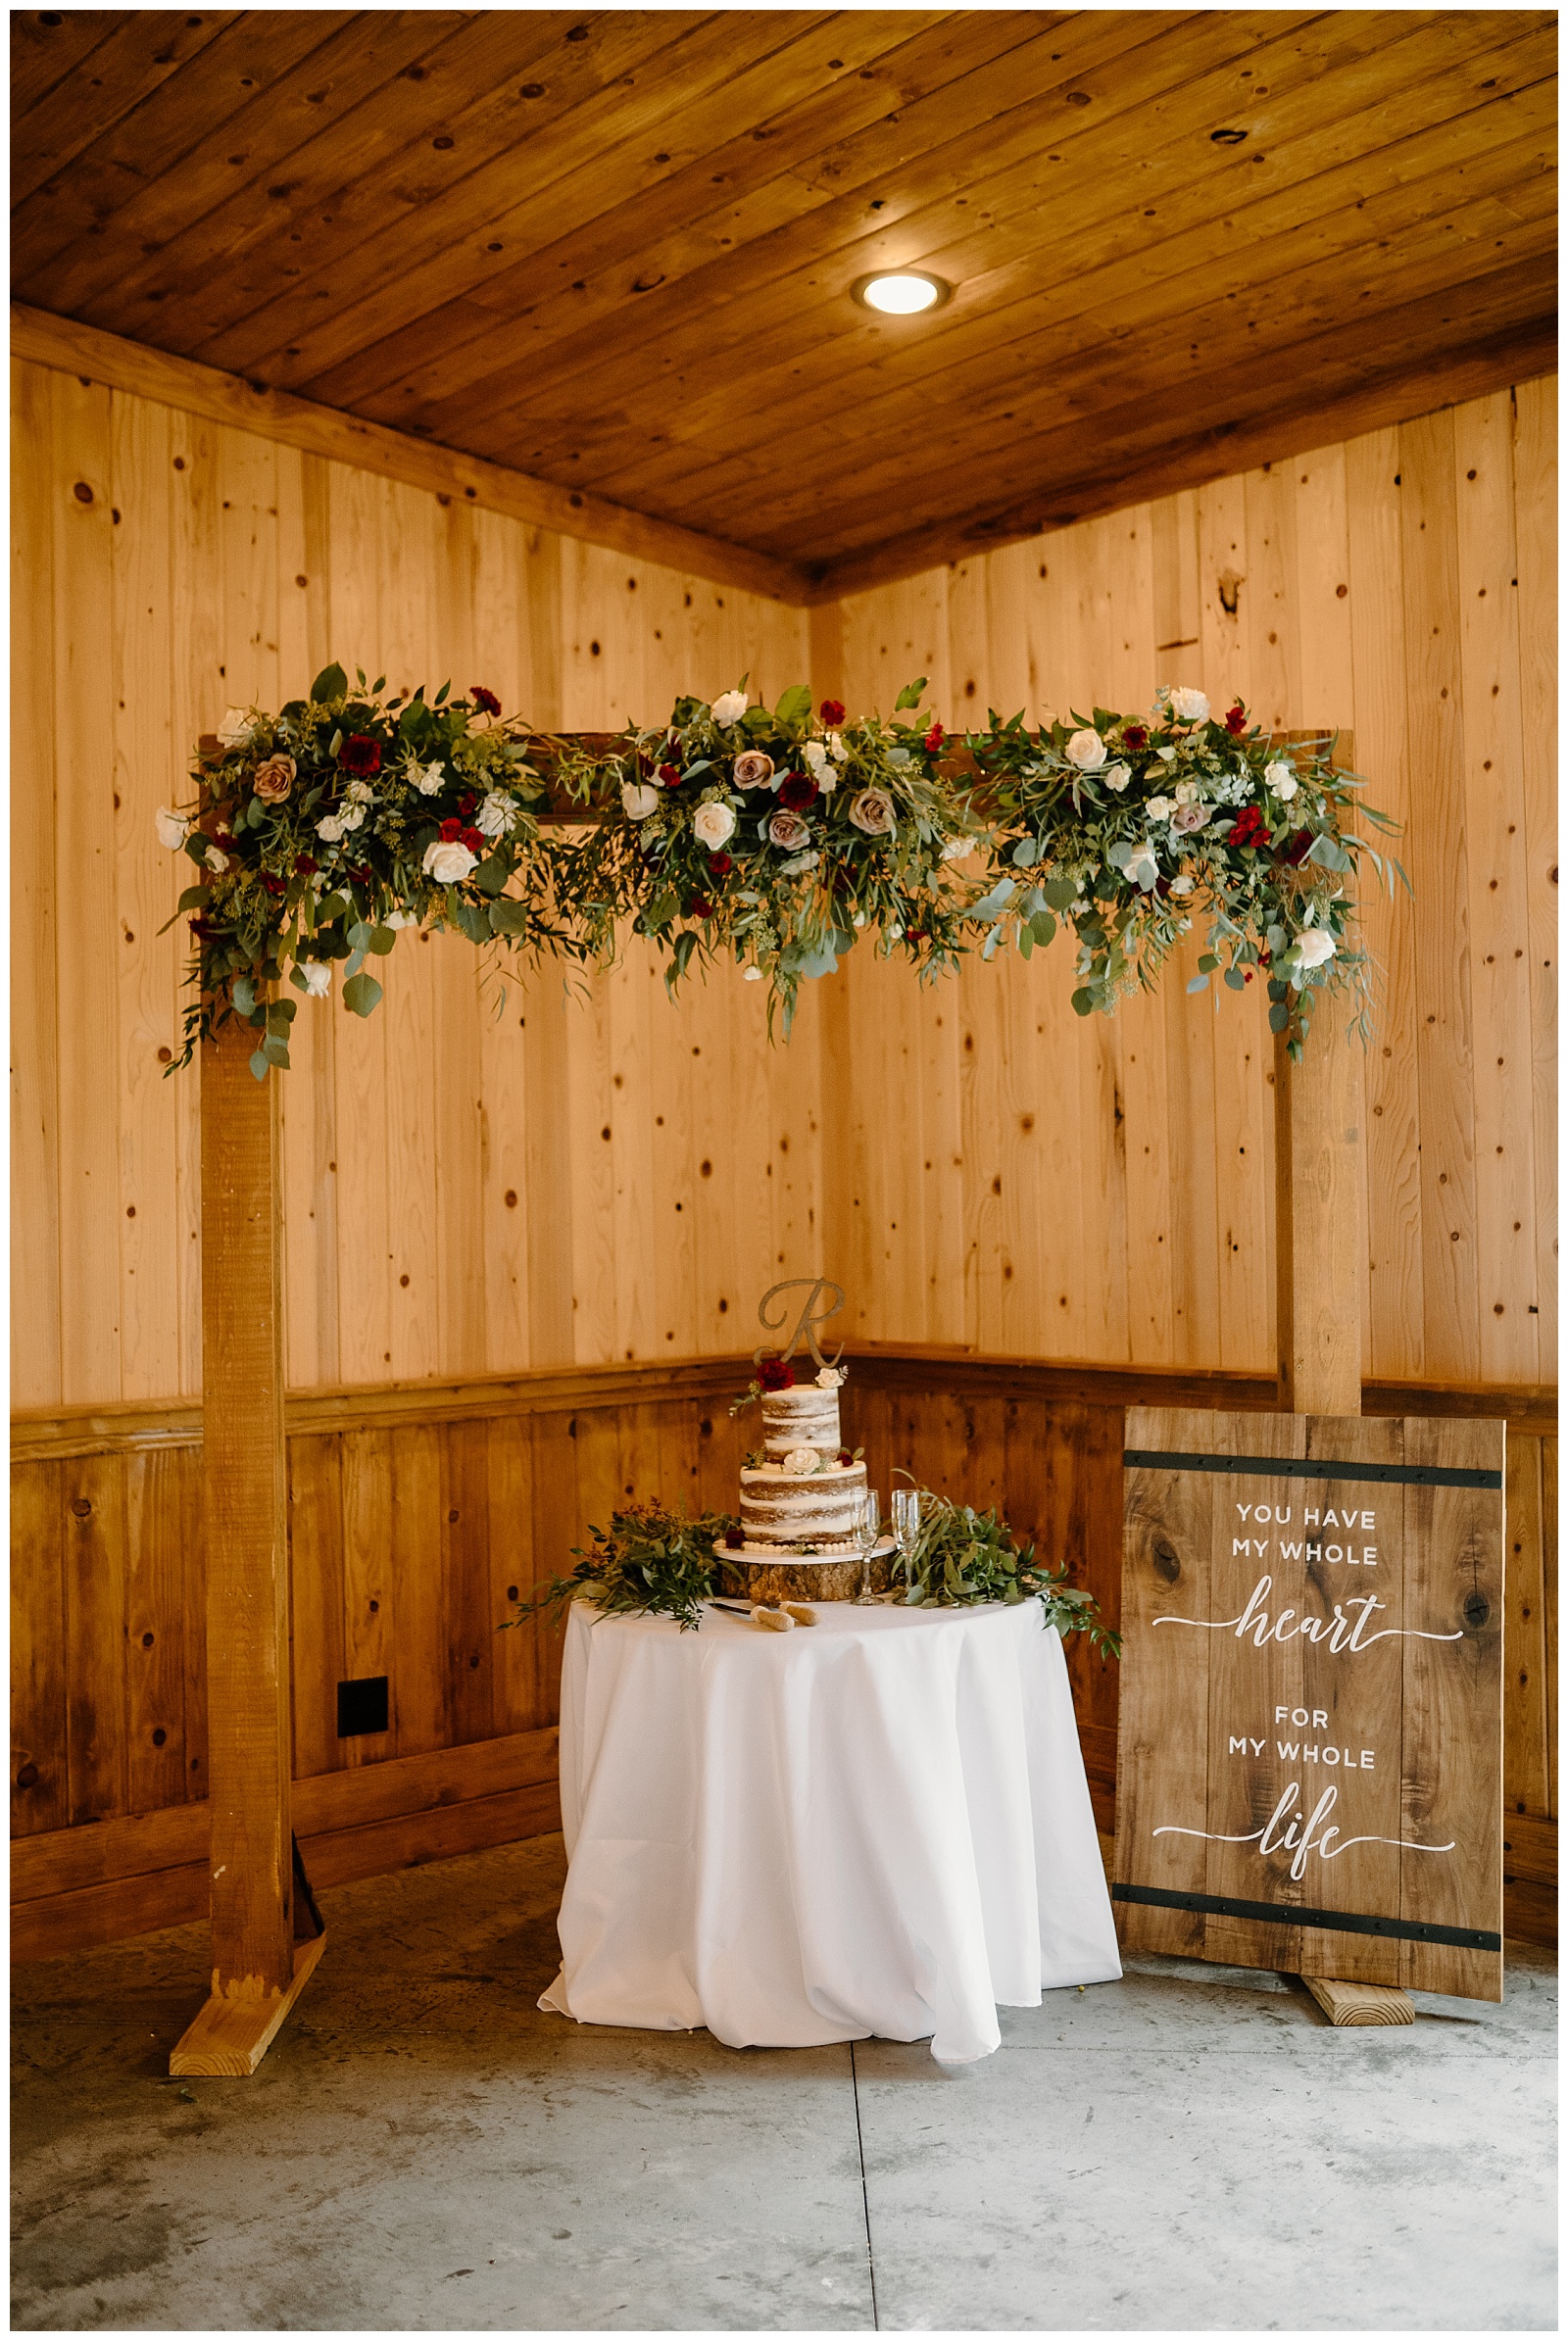 Cake table at wedding reception with floral arch overhead and lots of greenery